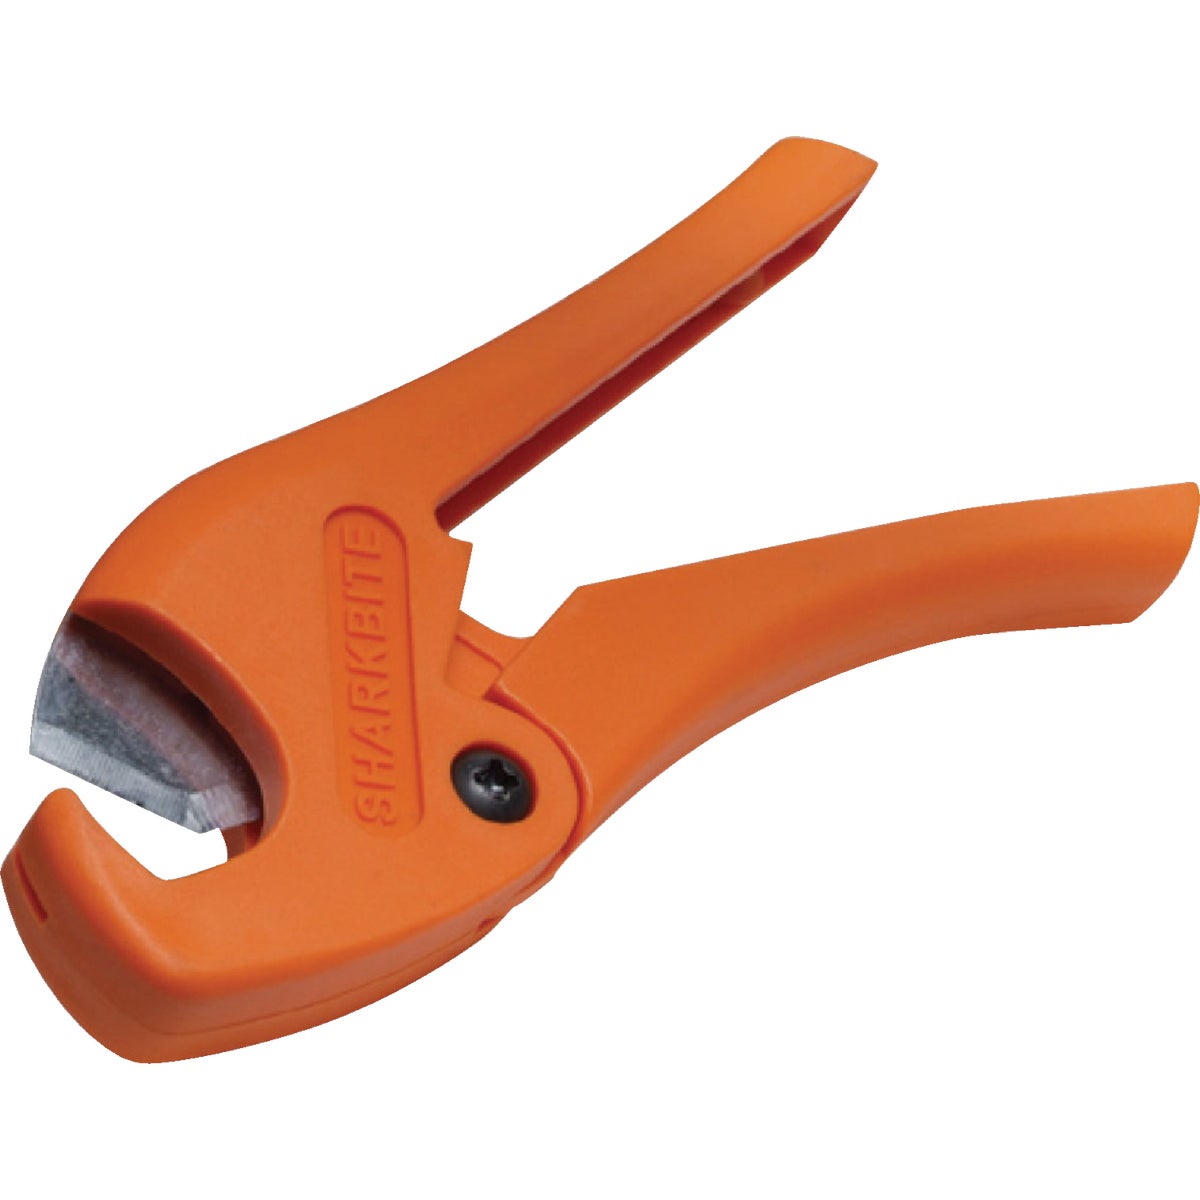 SharkBite PEX Tubing Cutter for 1/8 In. to 1 In. Pipe